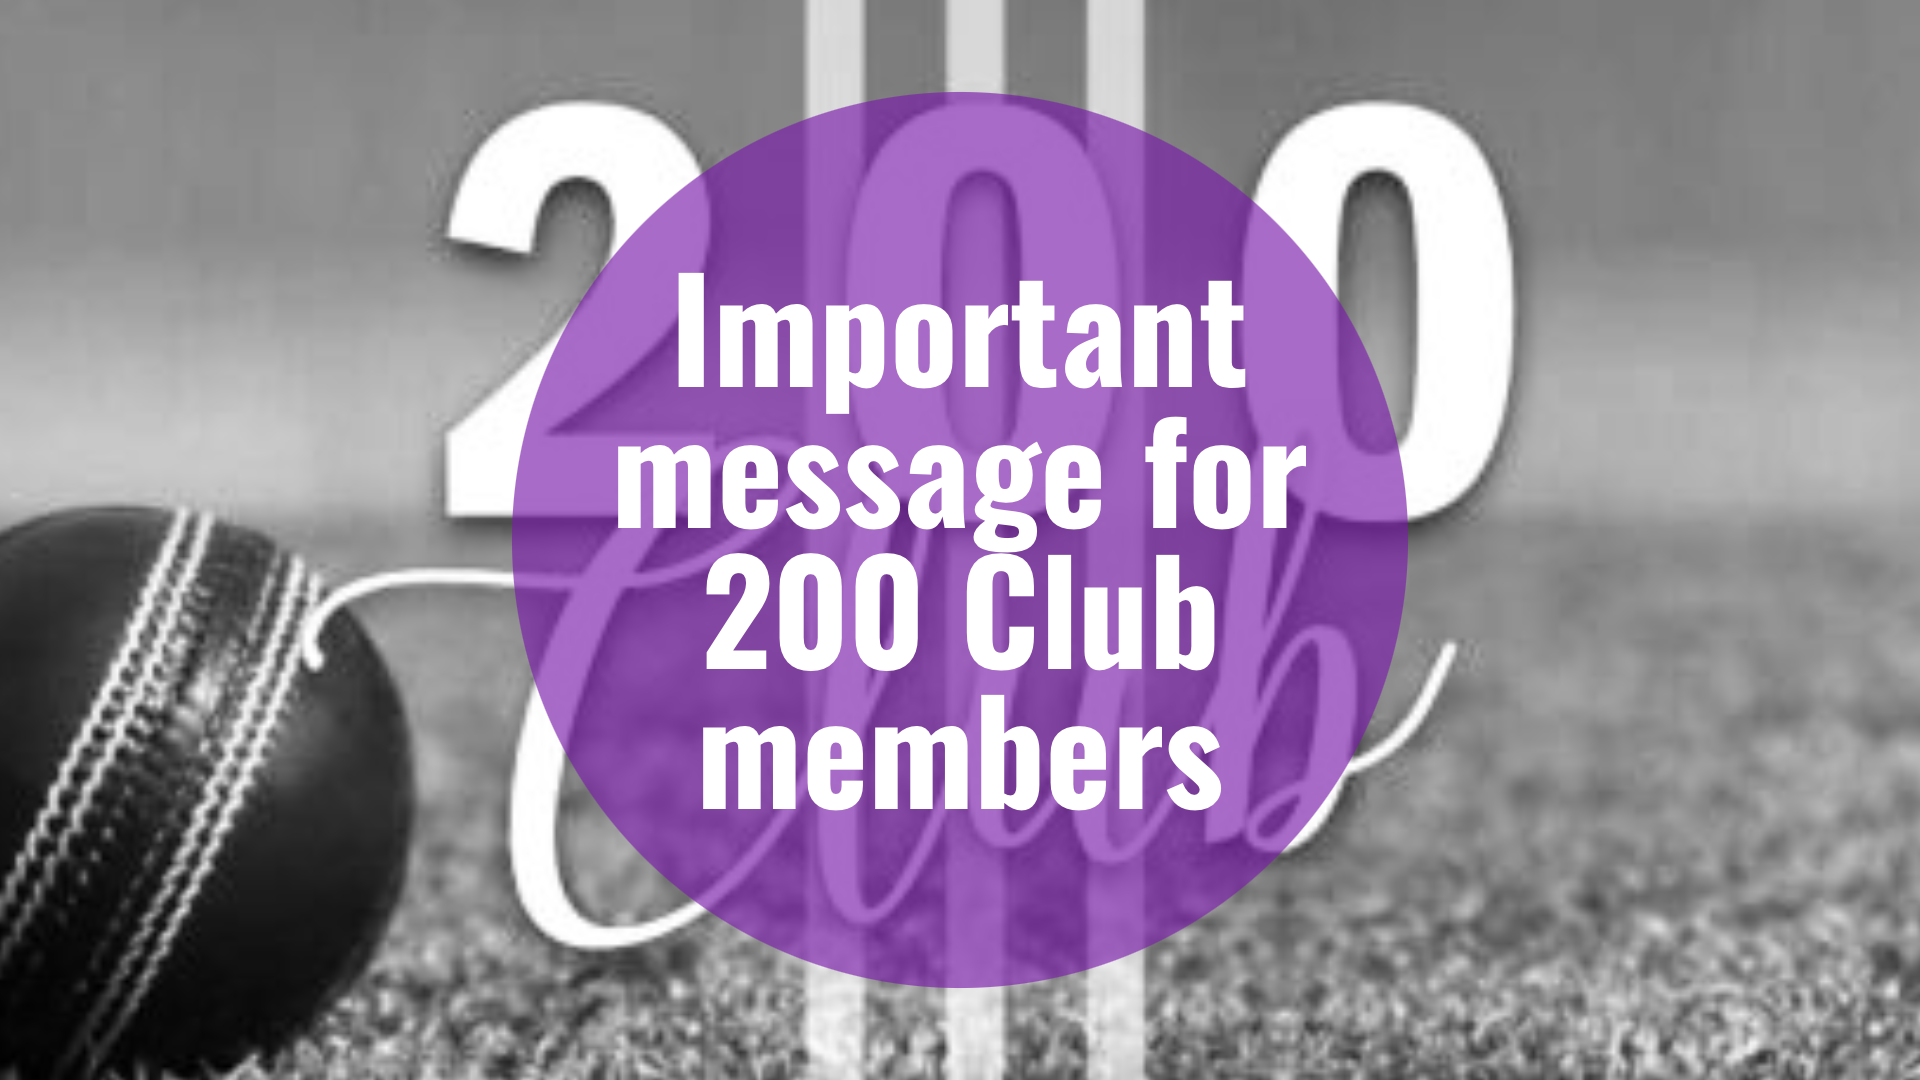 Important message for 200 Club Members - please act